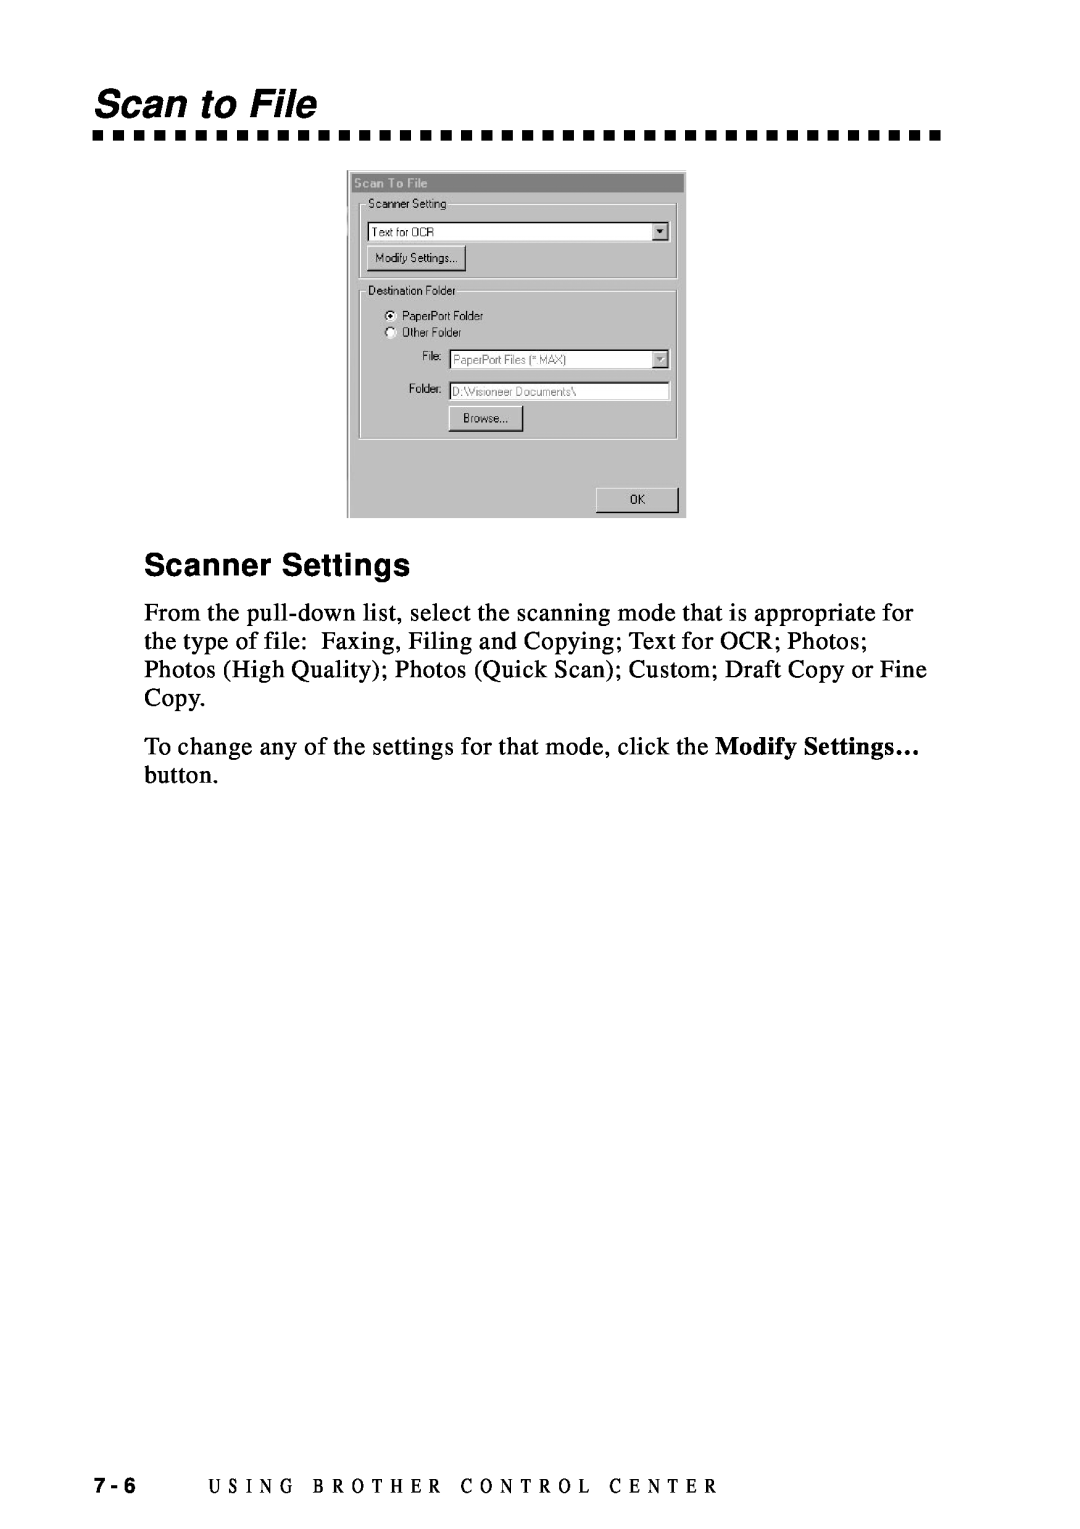 Brother DCP1200 manual Scan to File, Scanner Settings 